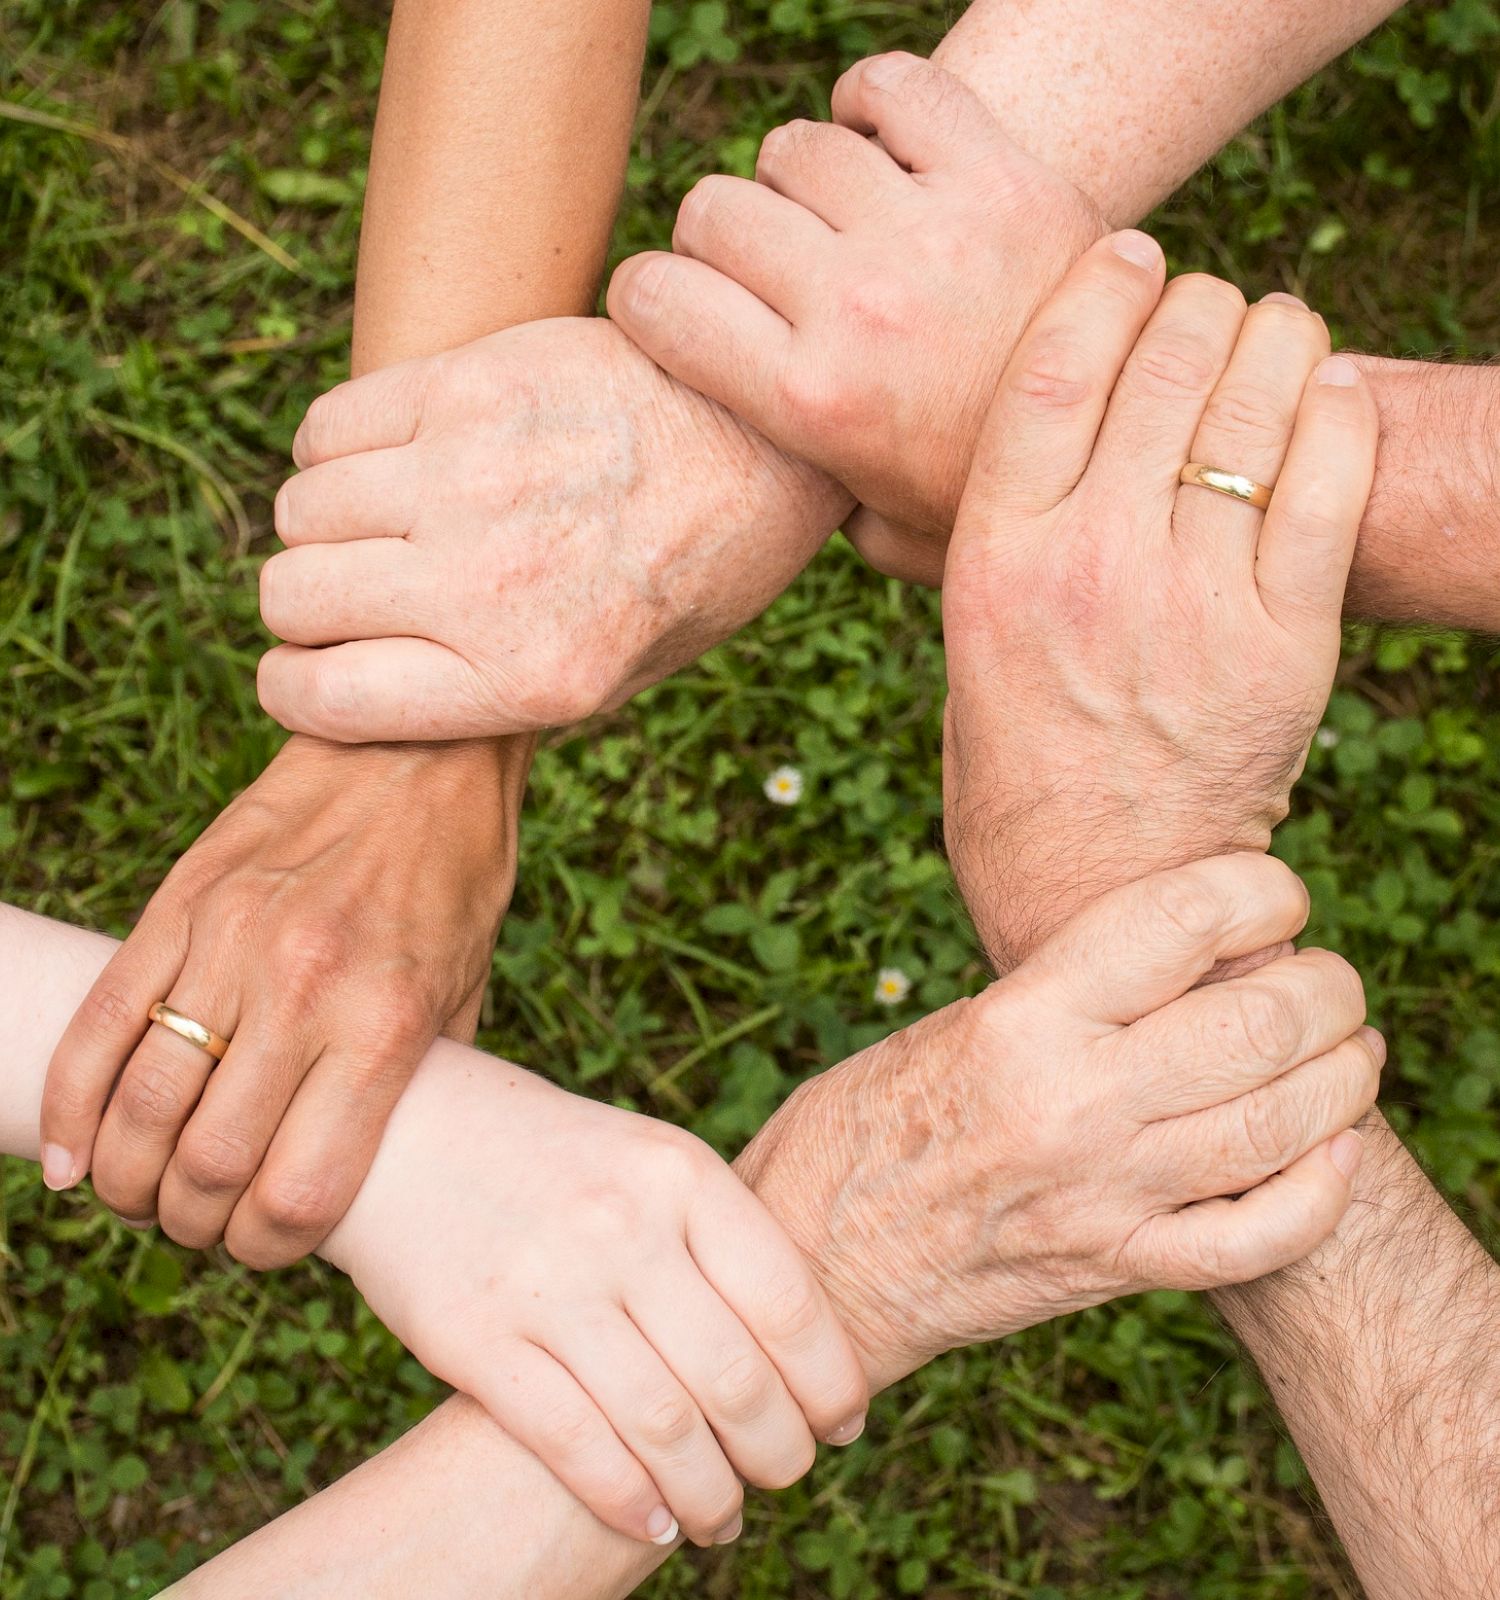 People of different skin tones forming a circle by holding each other's wrists, symbolizing unity and teamwork, with a grassy background.